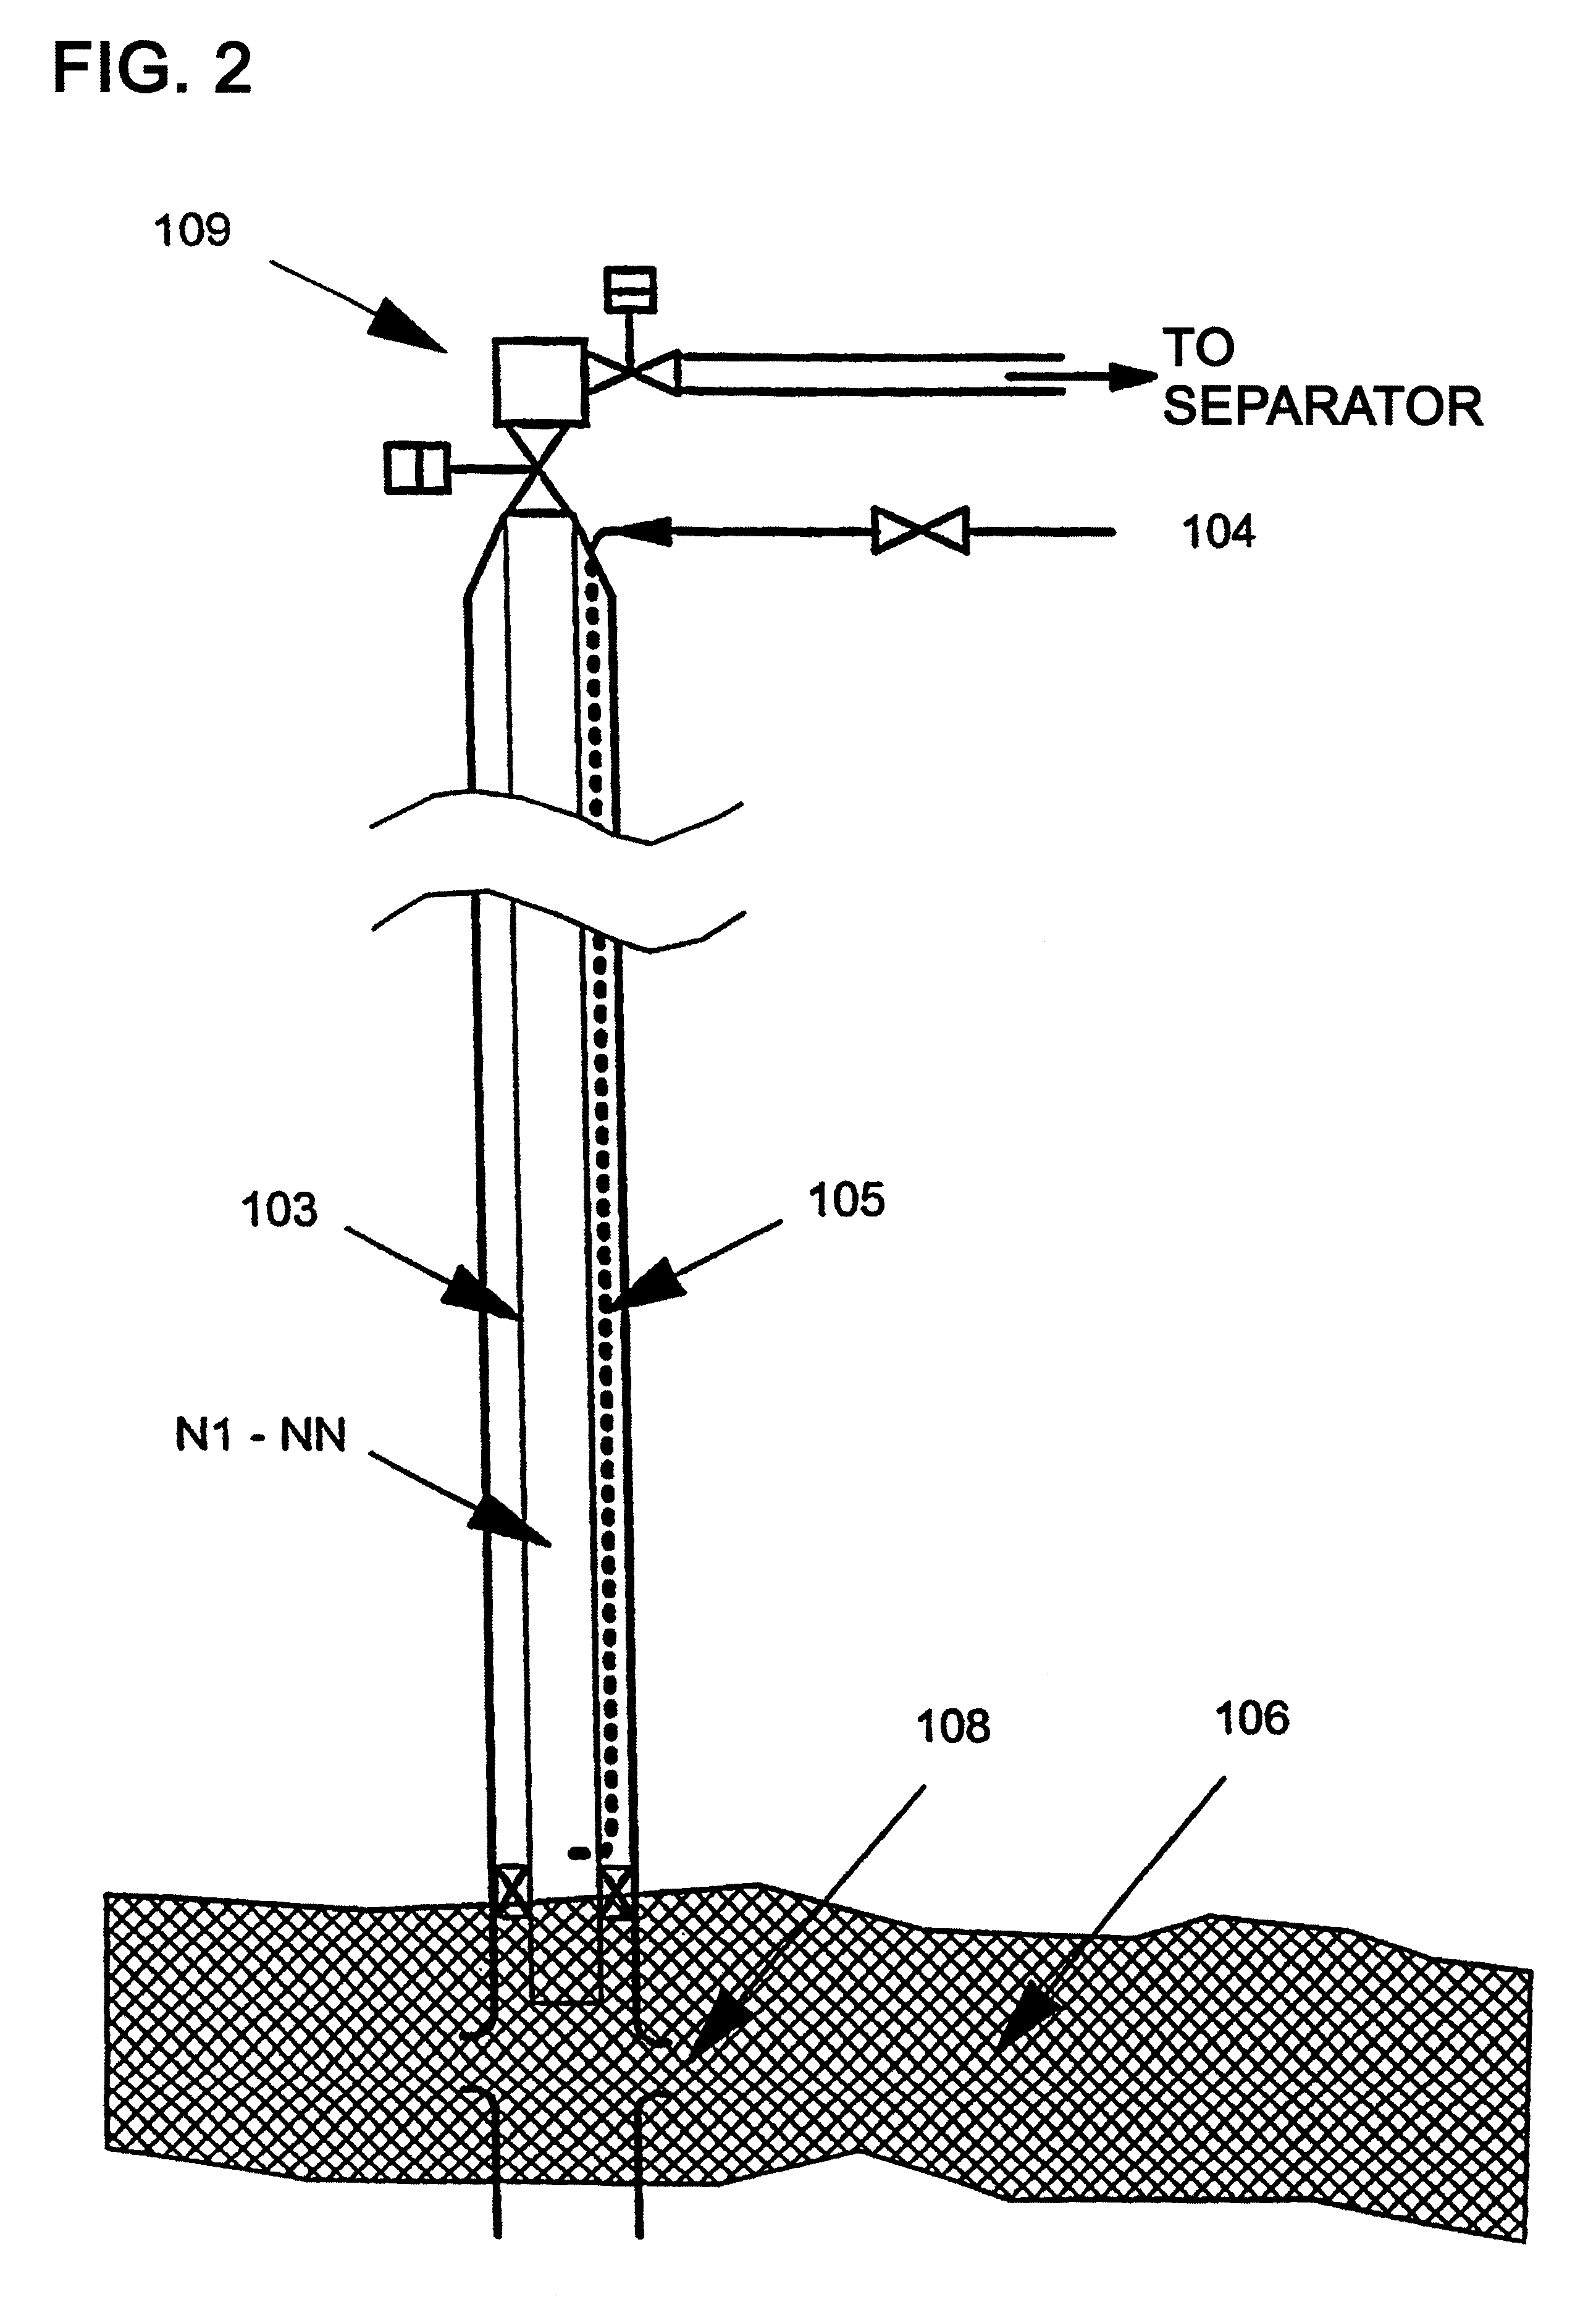 Use of static mixing element in connection with flow of gas and liquids through a production tubing